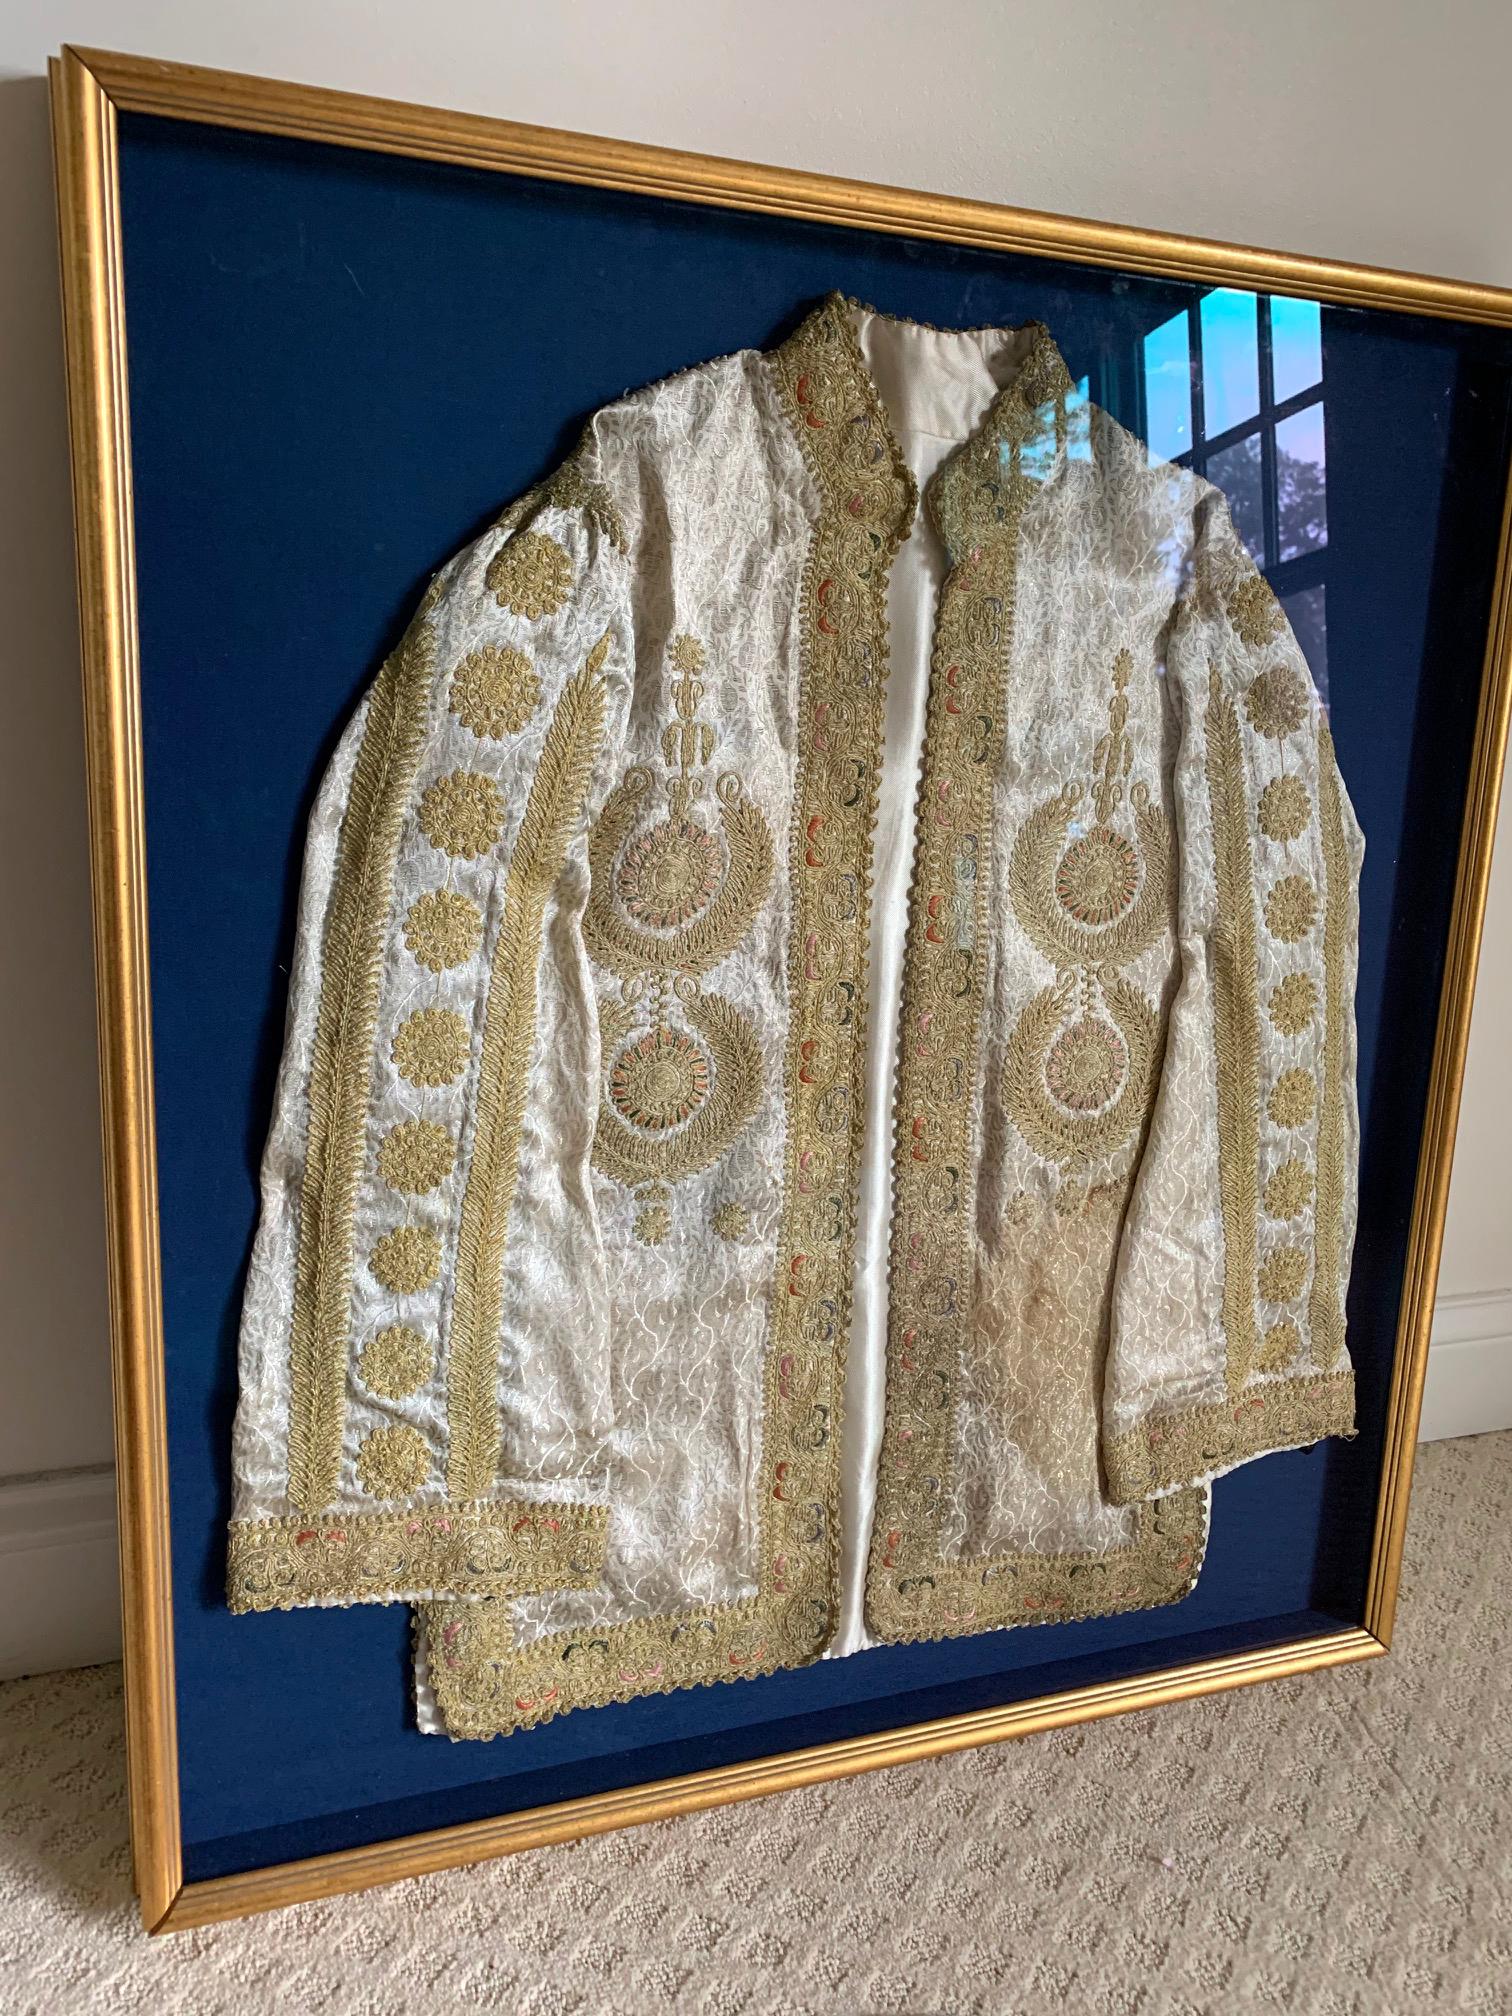 An lavishly decorated Turkish coat likely from the Ottoman Empire period circa 19th century, presented in a shadow box gilt frame with dark blue fabric lining. The jacket was made from a silver damask patterned brocade with elaborate embroidery with